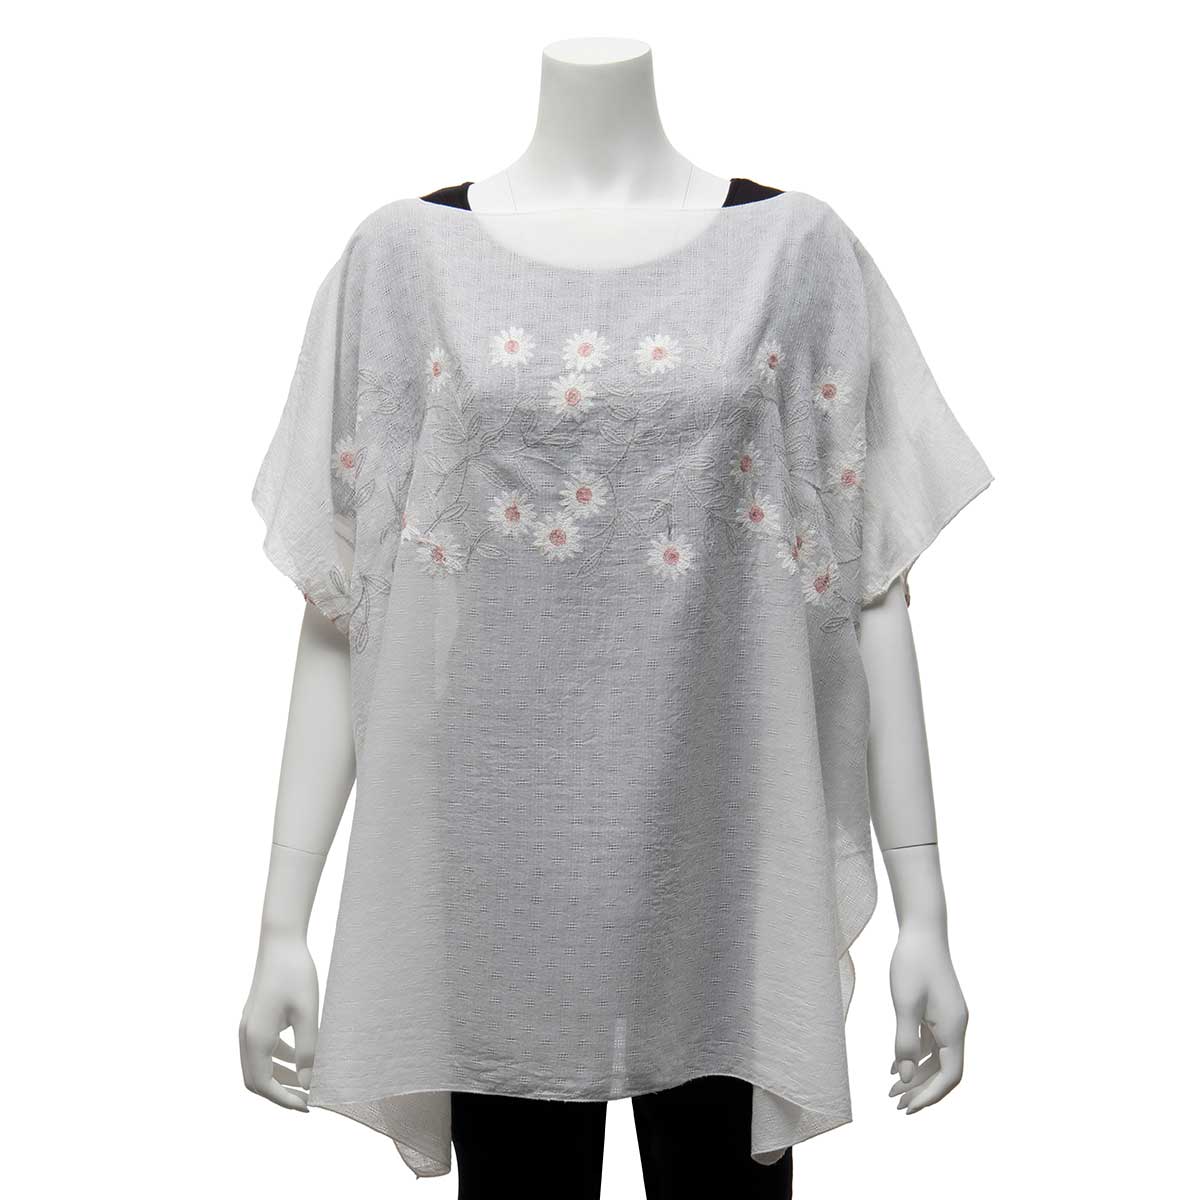 Tunic Embroidered with Daisies 33"x29"